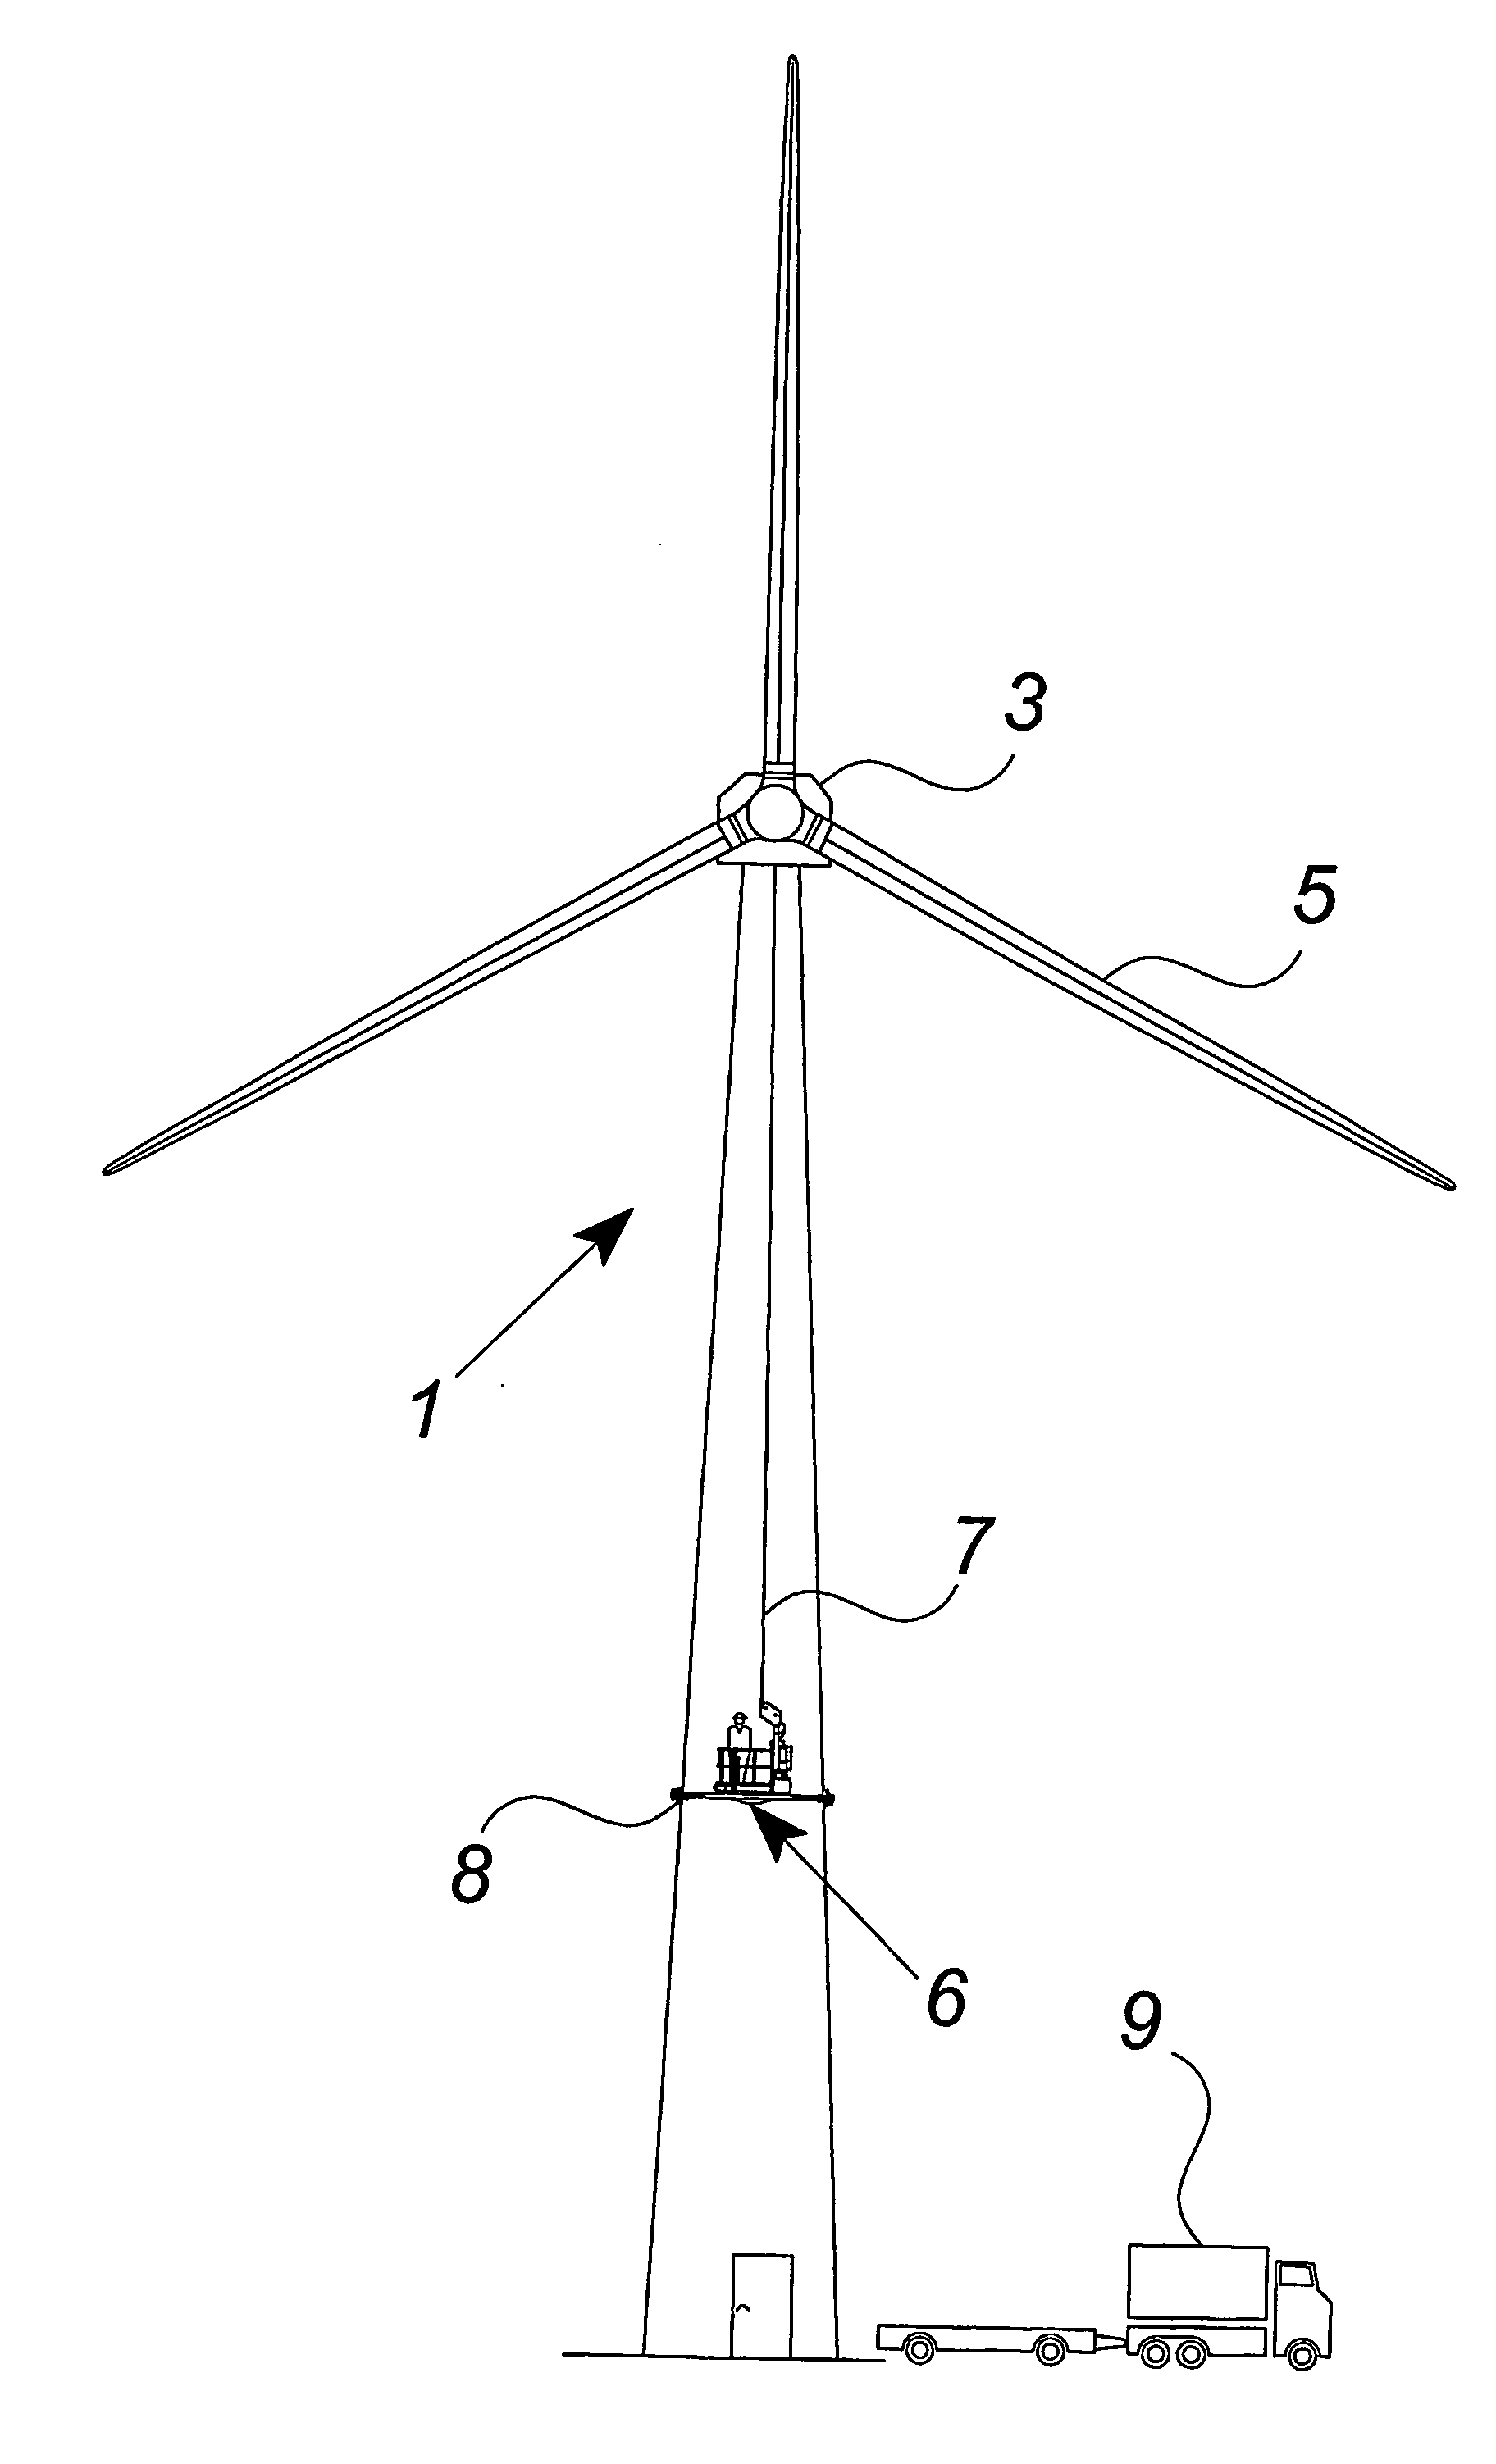 Method of servicing the outer components of a wind turbine such as the wind turbine blades and the tower with a work platform and work platform